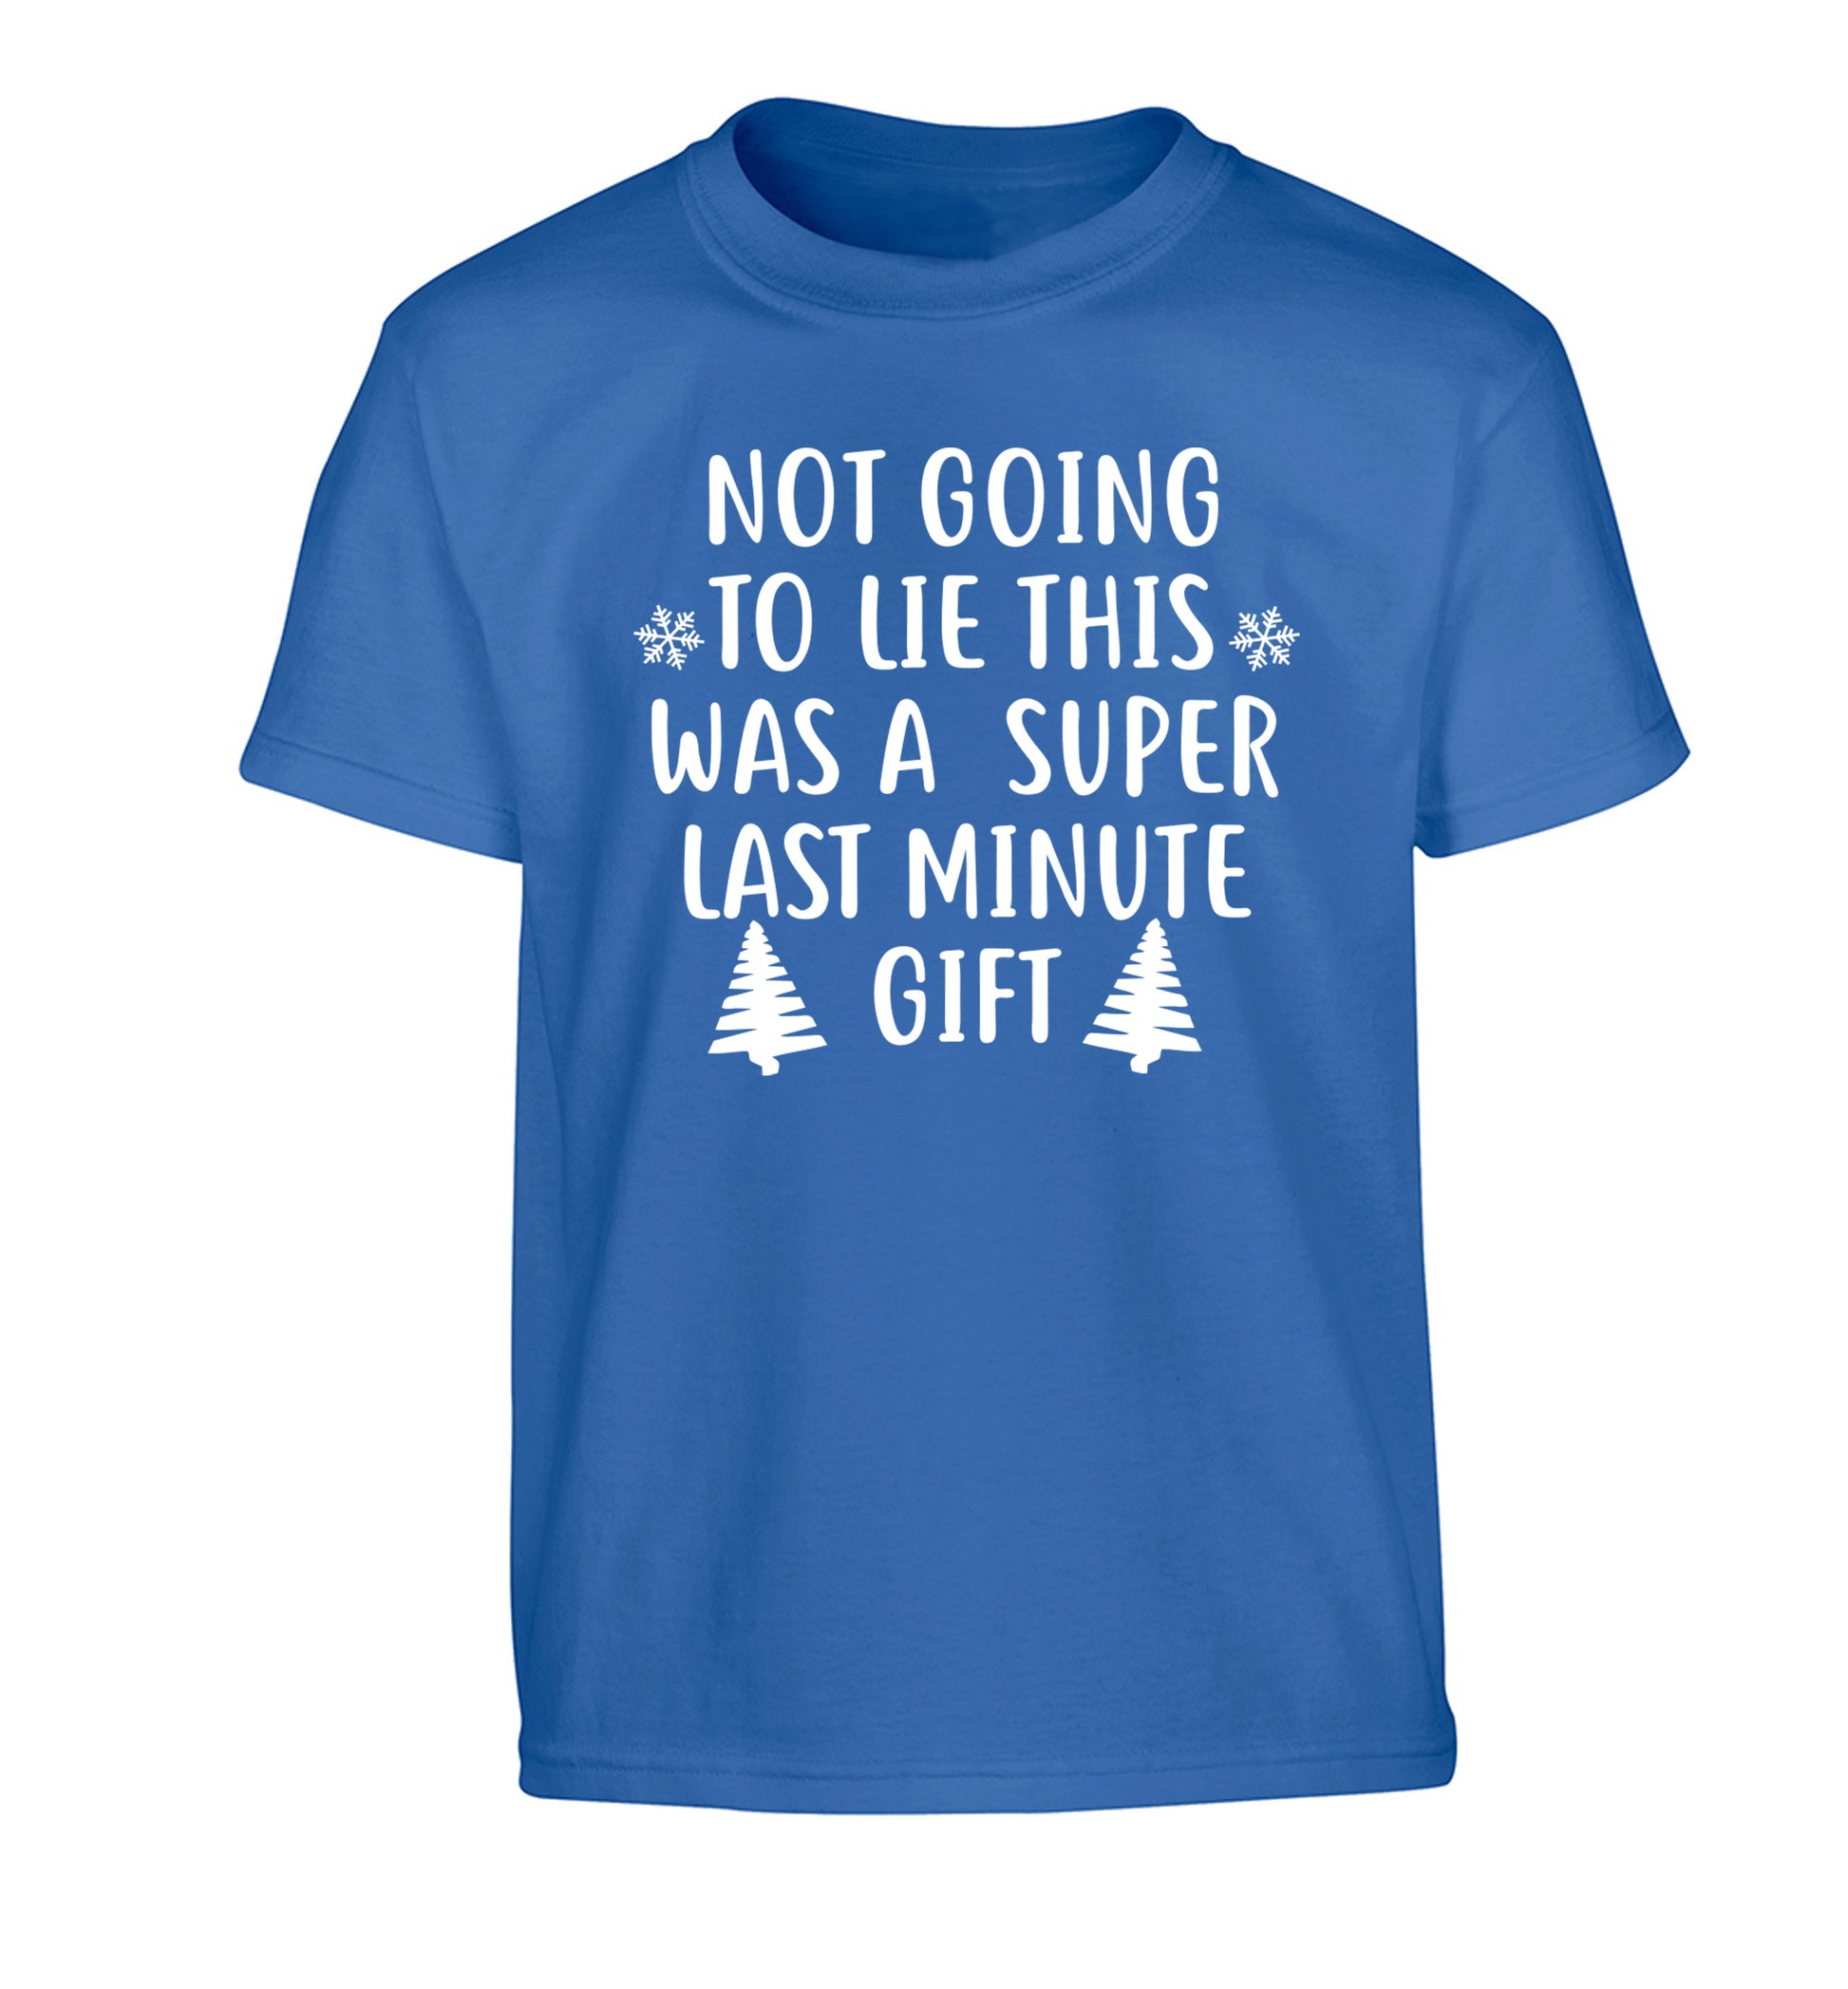 Not going to lie this was a super last minute gift Children's blue Tshirt 12-13 Years